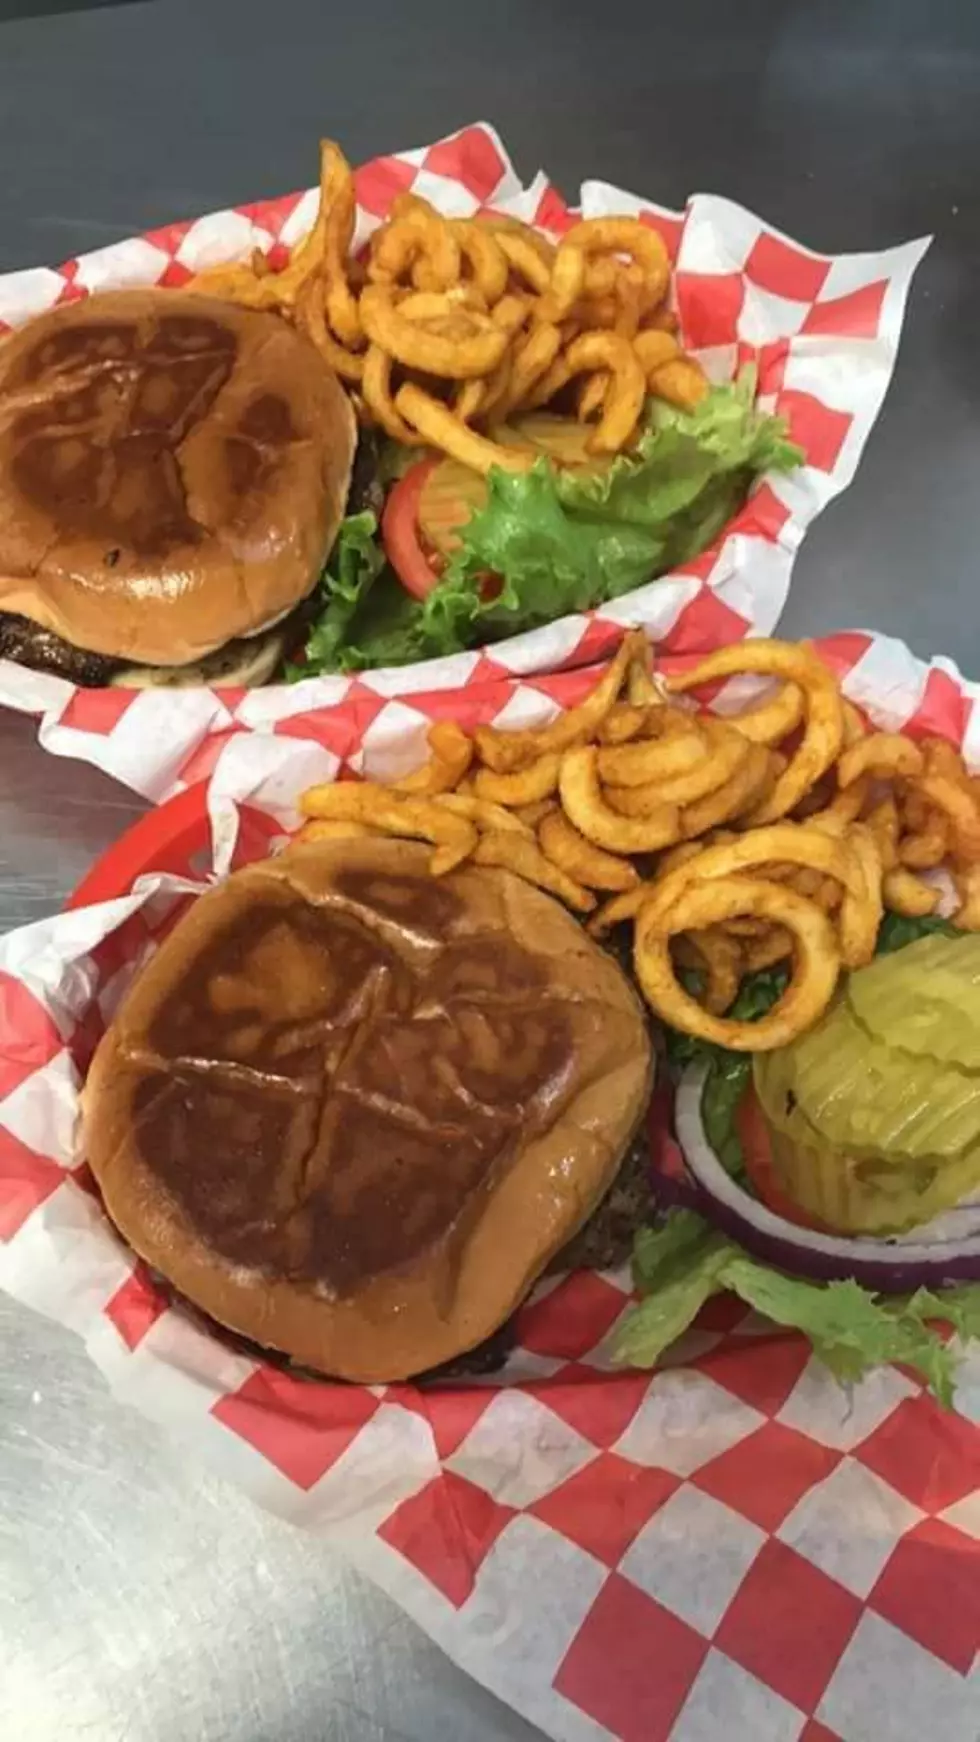 Lubbock’s Woodys Burger Barn Finally Announces Opening